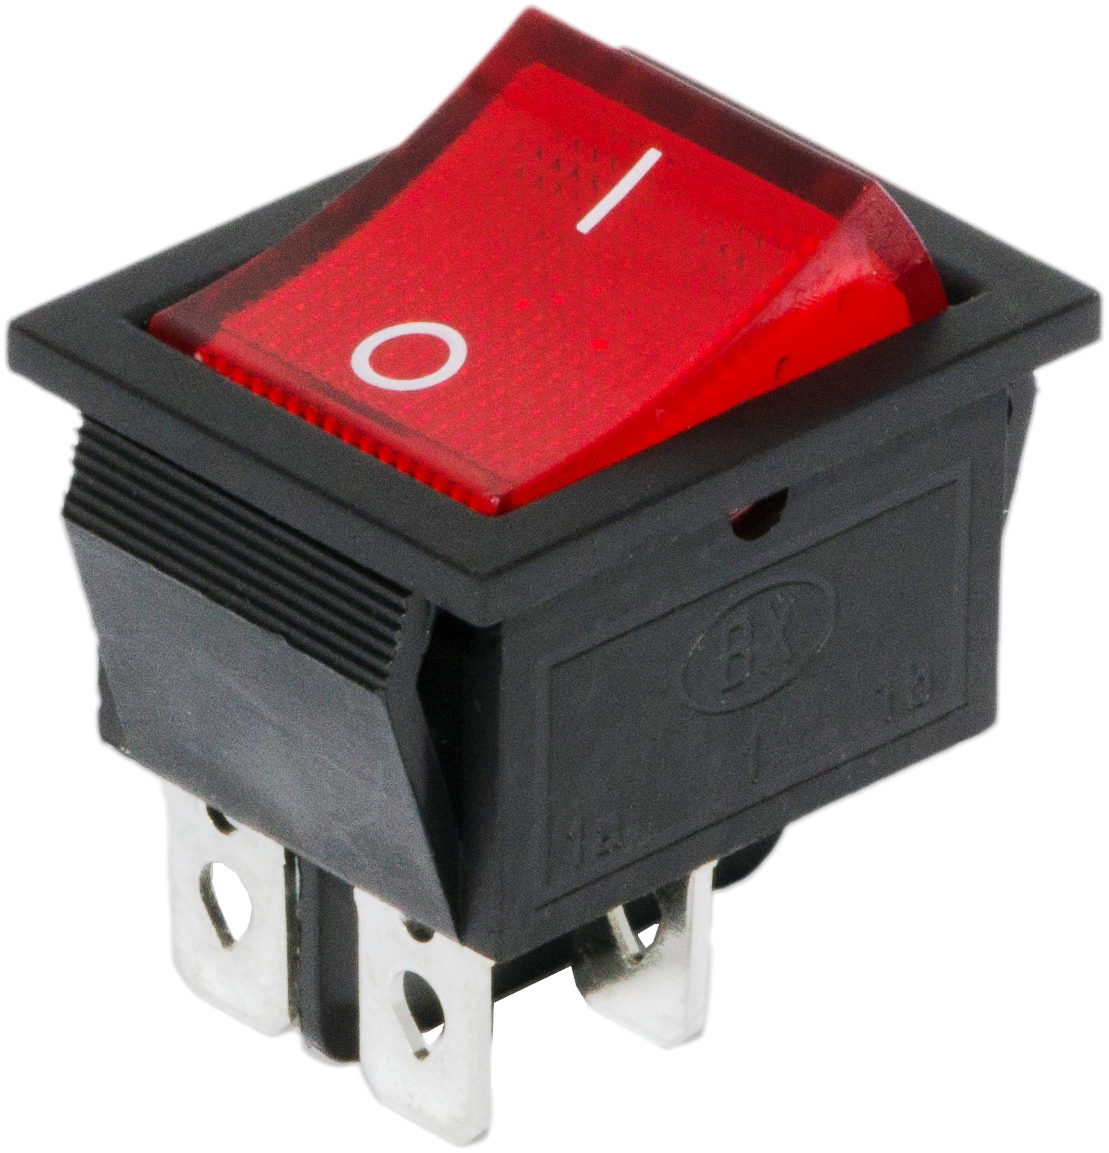 AC 20A/125V 22A/250V DPDT 6Pin 2 Position Illuminated Red rocker switch *4 PACK*